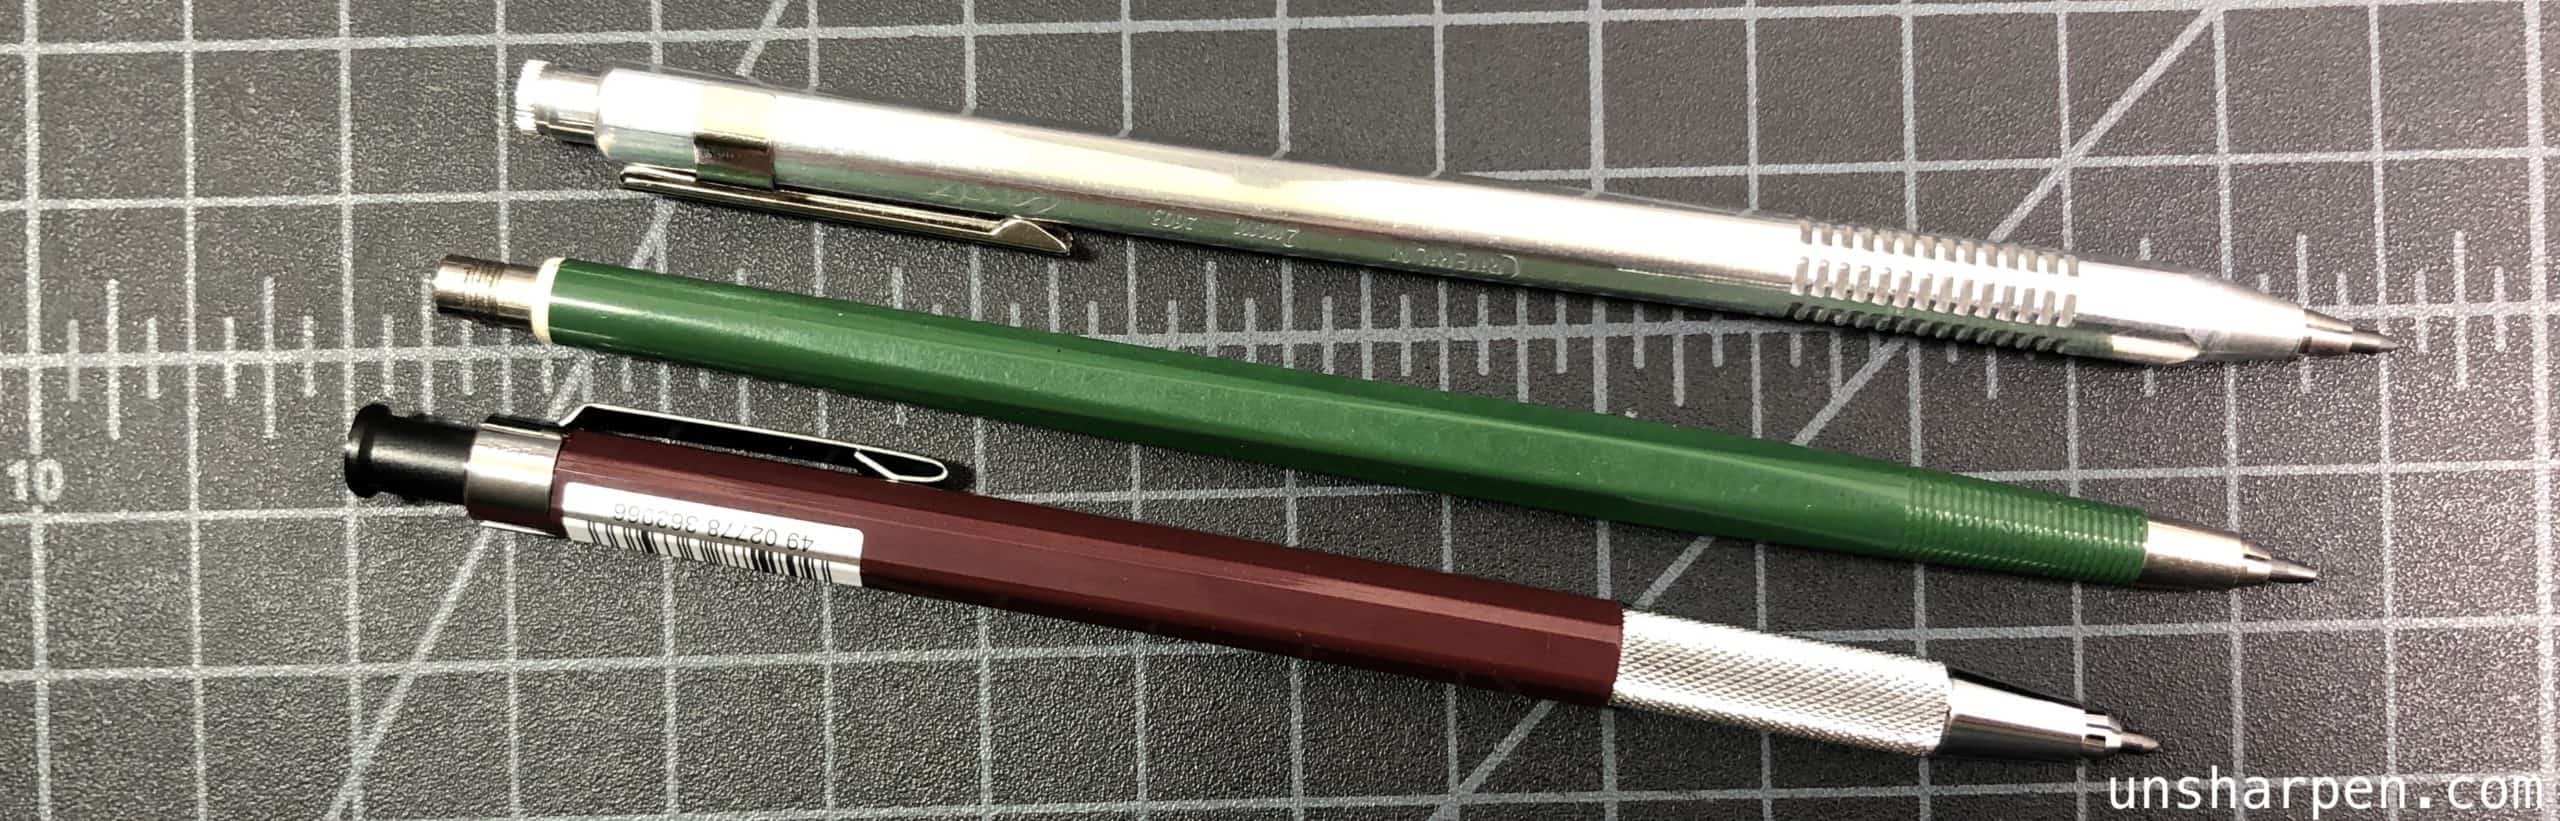 A few examples of 2mm lead pointers/sharpeners : r/pencils